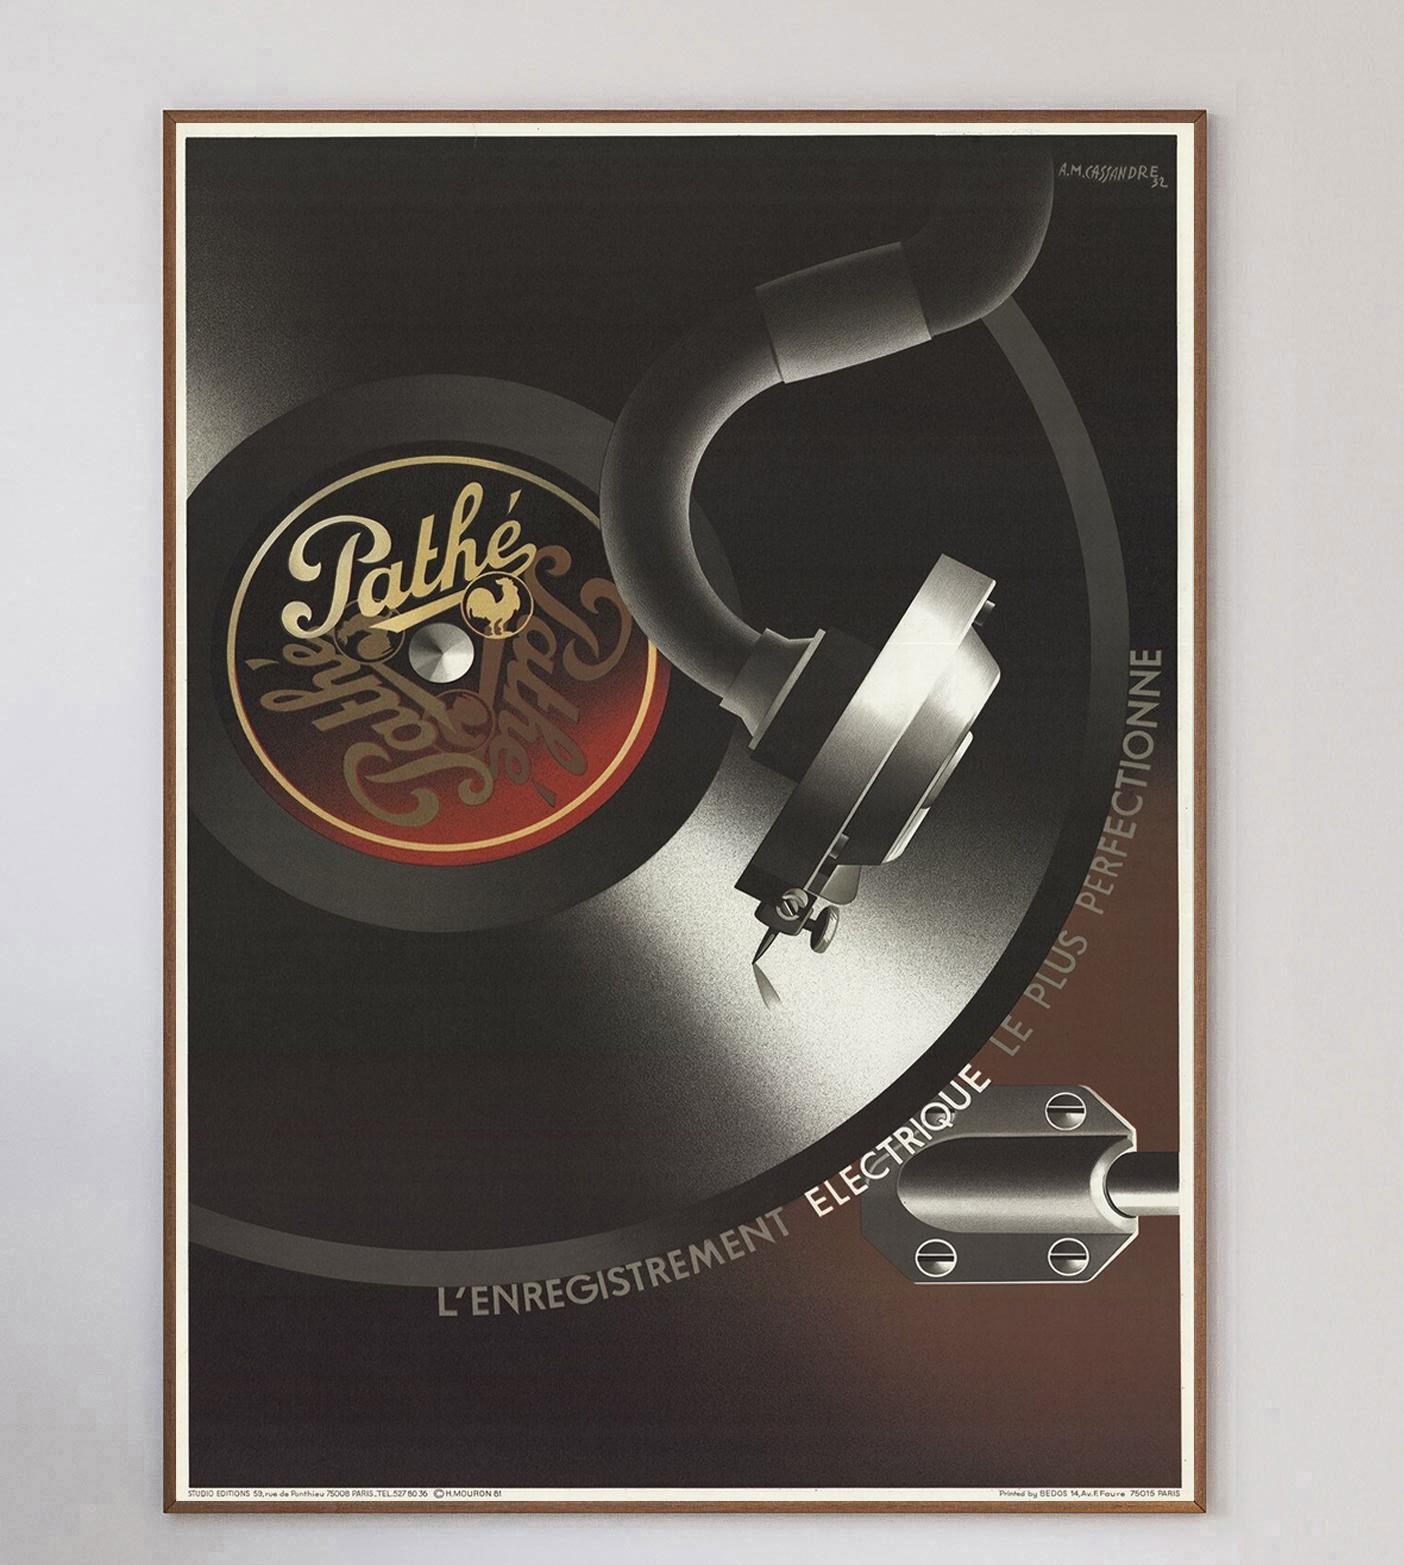 Stunning advertisement poster for Pathe record players originally designed in 1932 by the iconic poster designer A.M. Cassandre. The artwork depicts a vinyl record spinning on the player in gorgeous art deco style.

This lithograph piece was